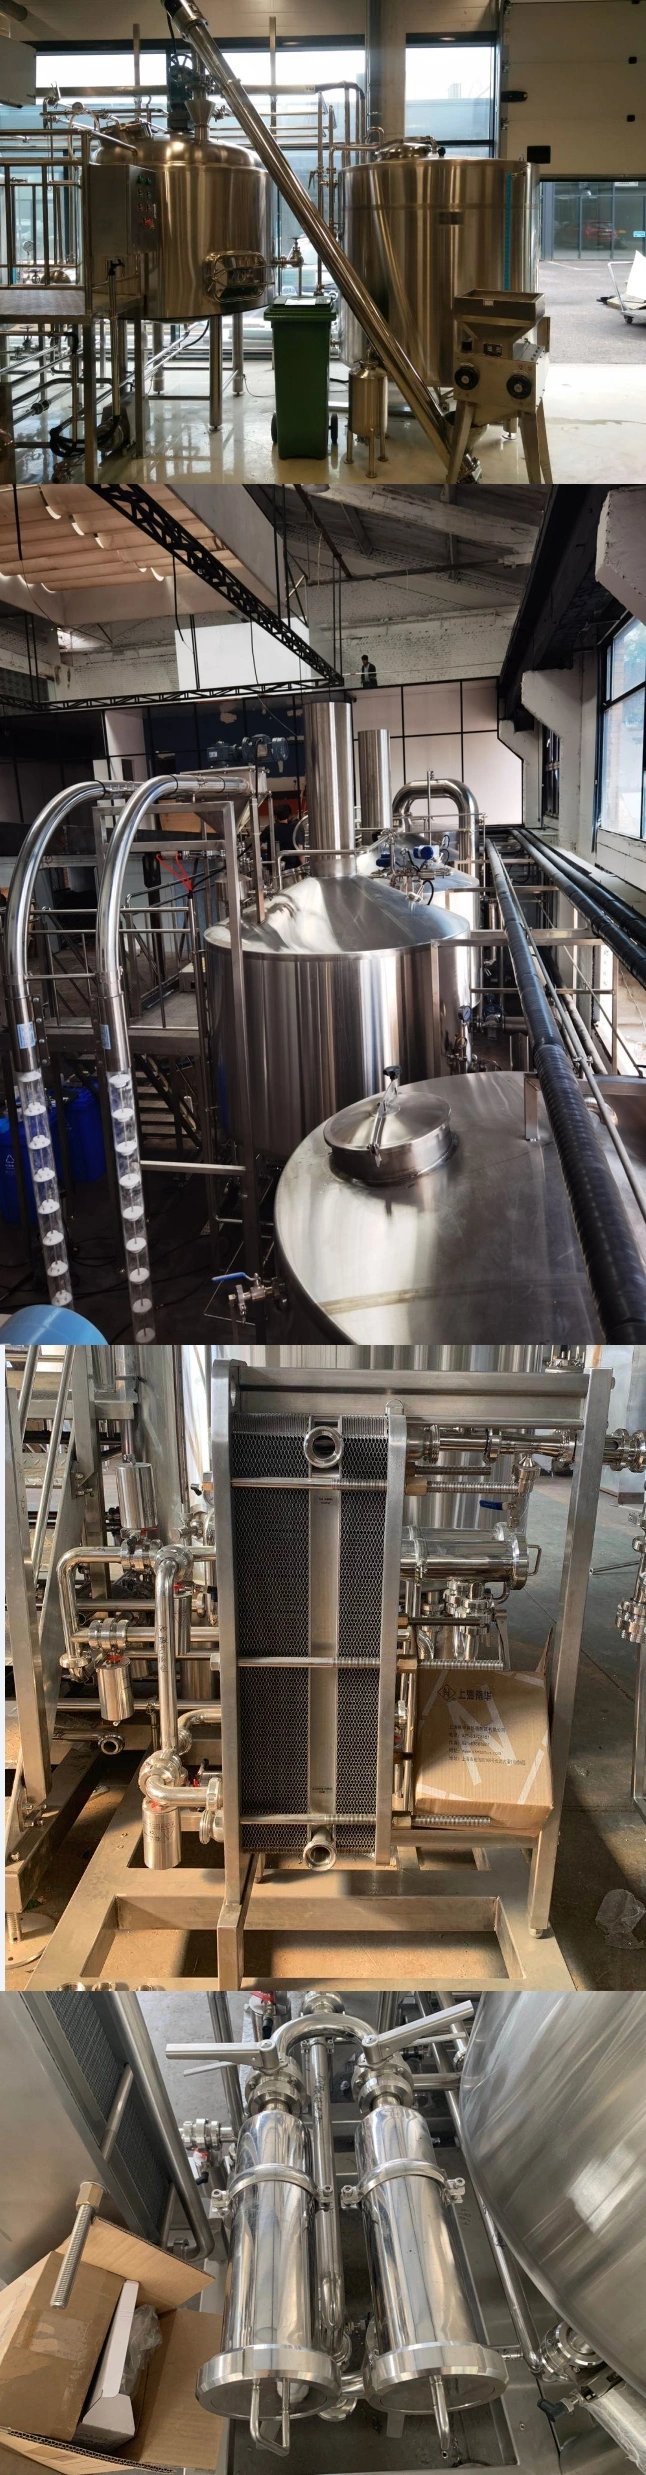 4 Vessel Brewery Equipment Brewhouse Large Commercial Beer Brewing System